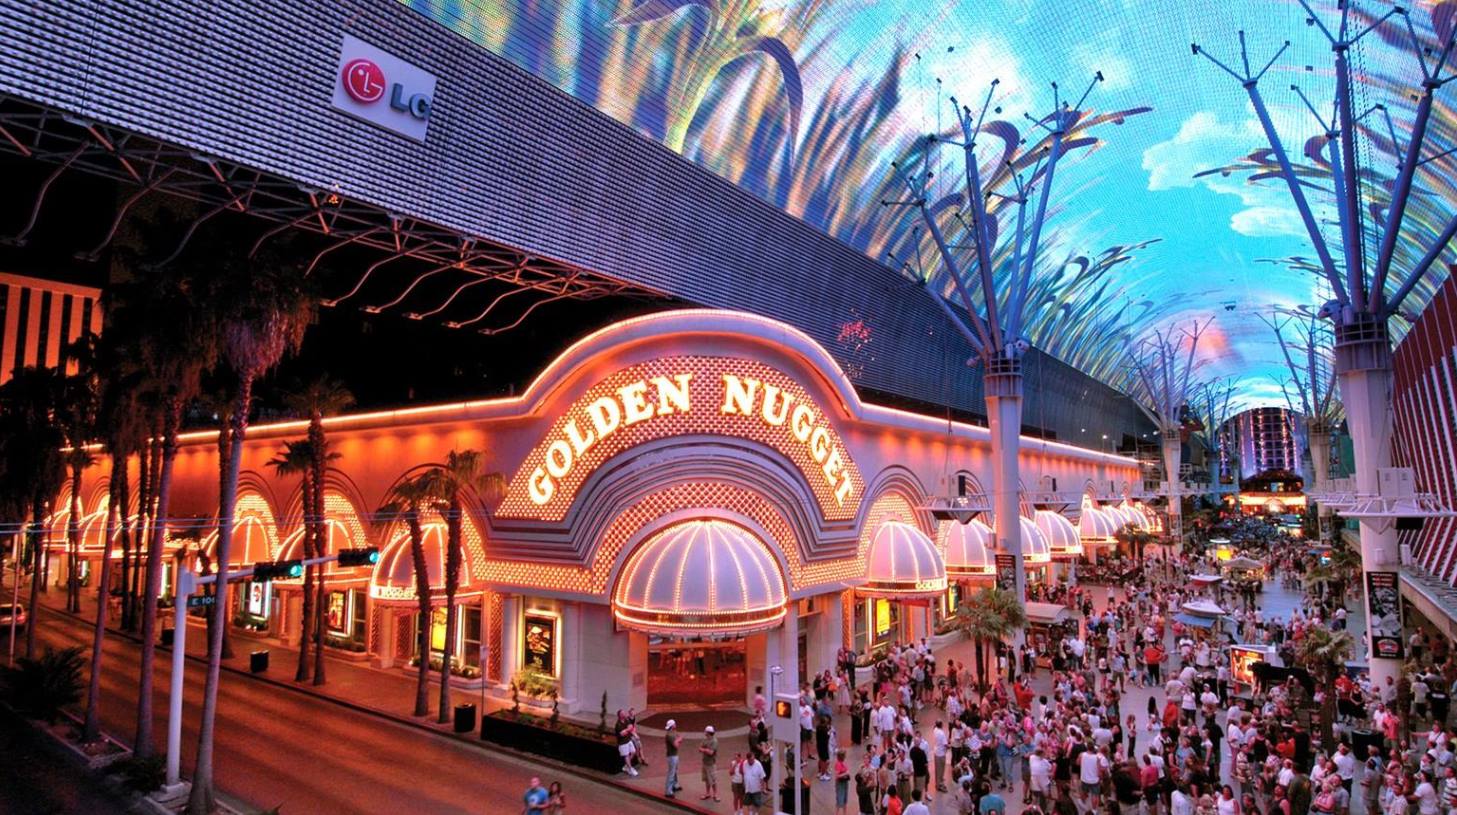 The busy western corner entrance and bright signage of the Golden Nugget Las Vegas resort on downtown’s Fremont Street.